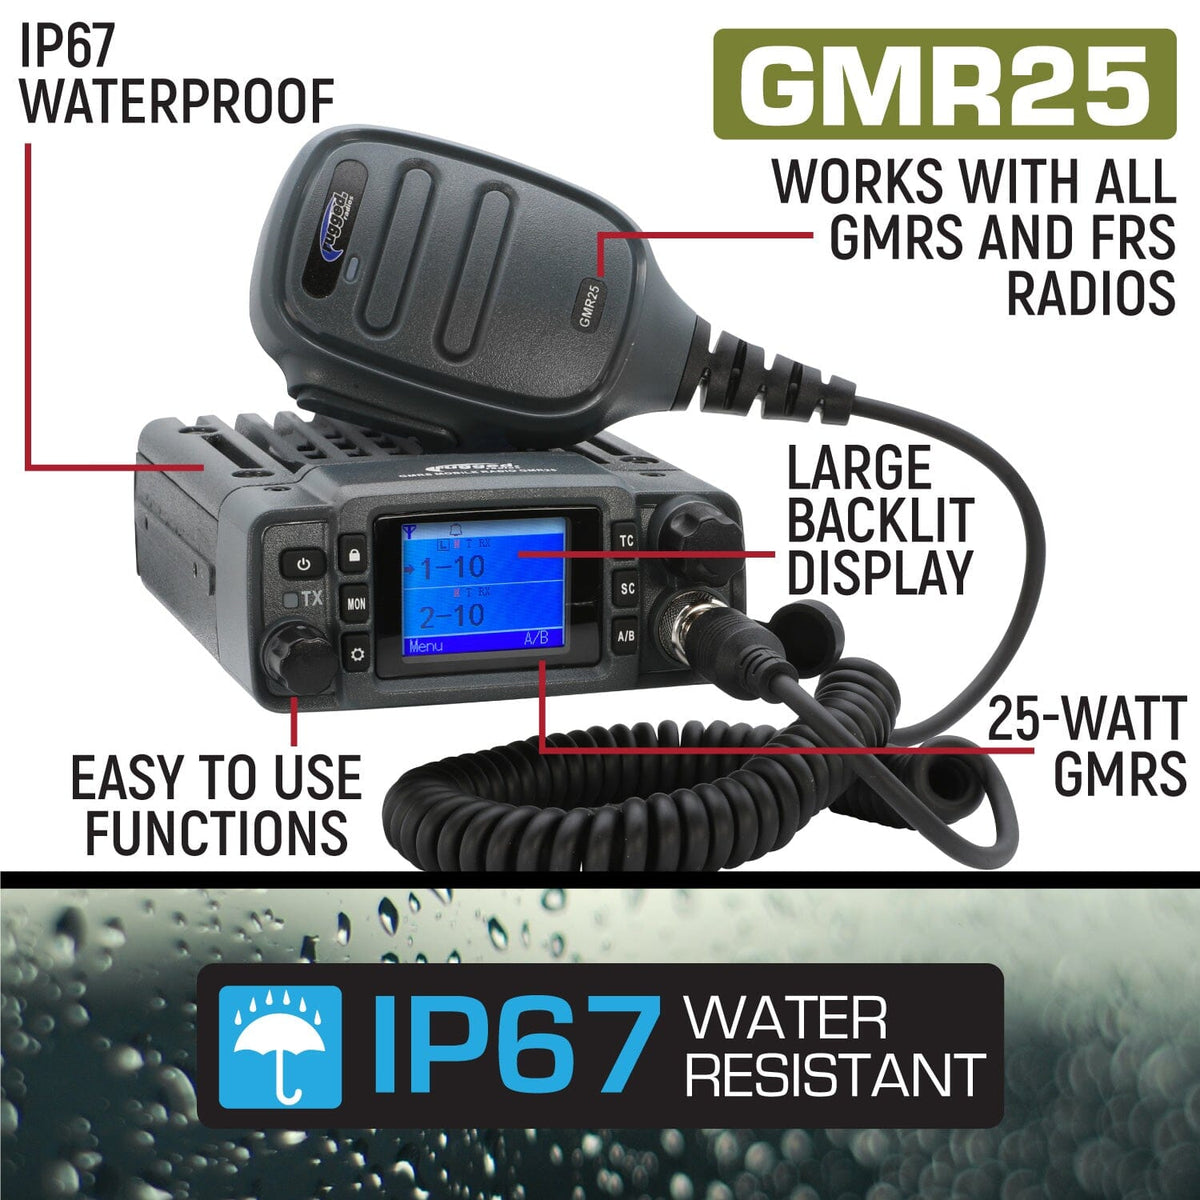 Radio Kit Lite GMR25 Waterproof GMRS Mobile Radio with Stealth Antenna